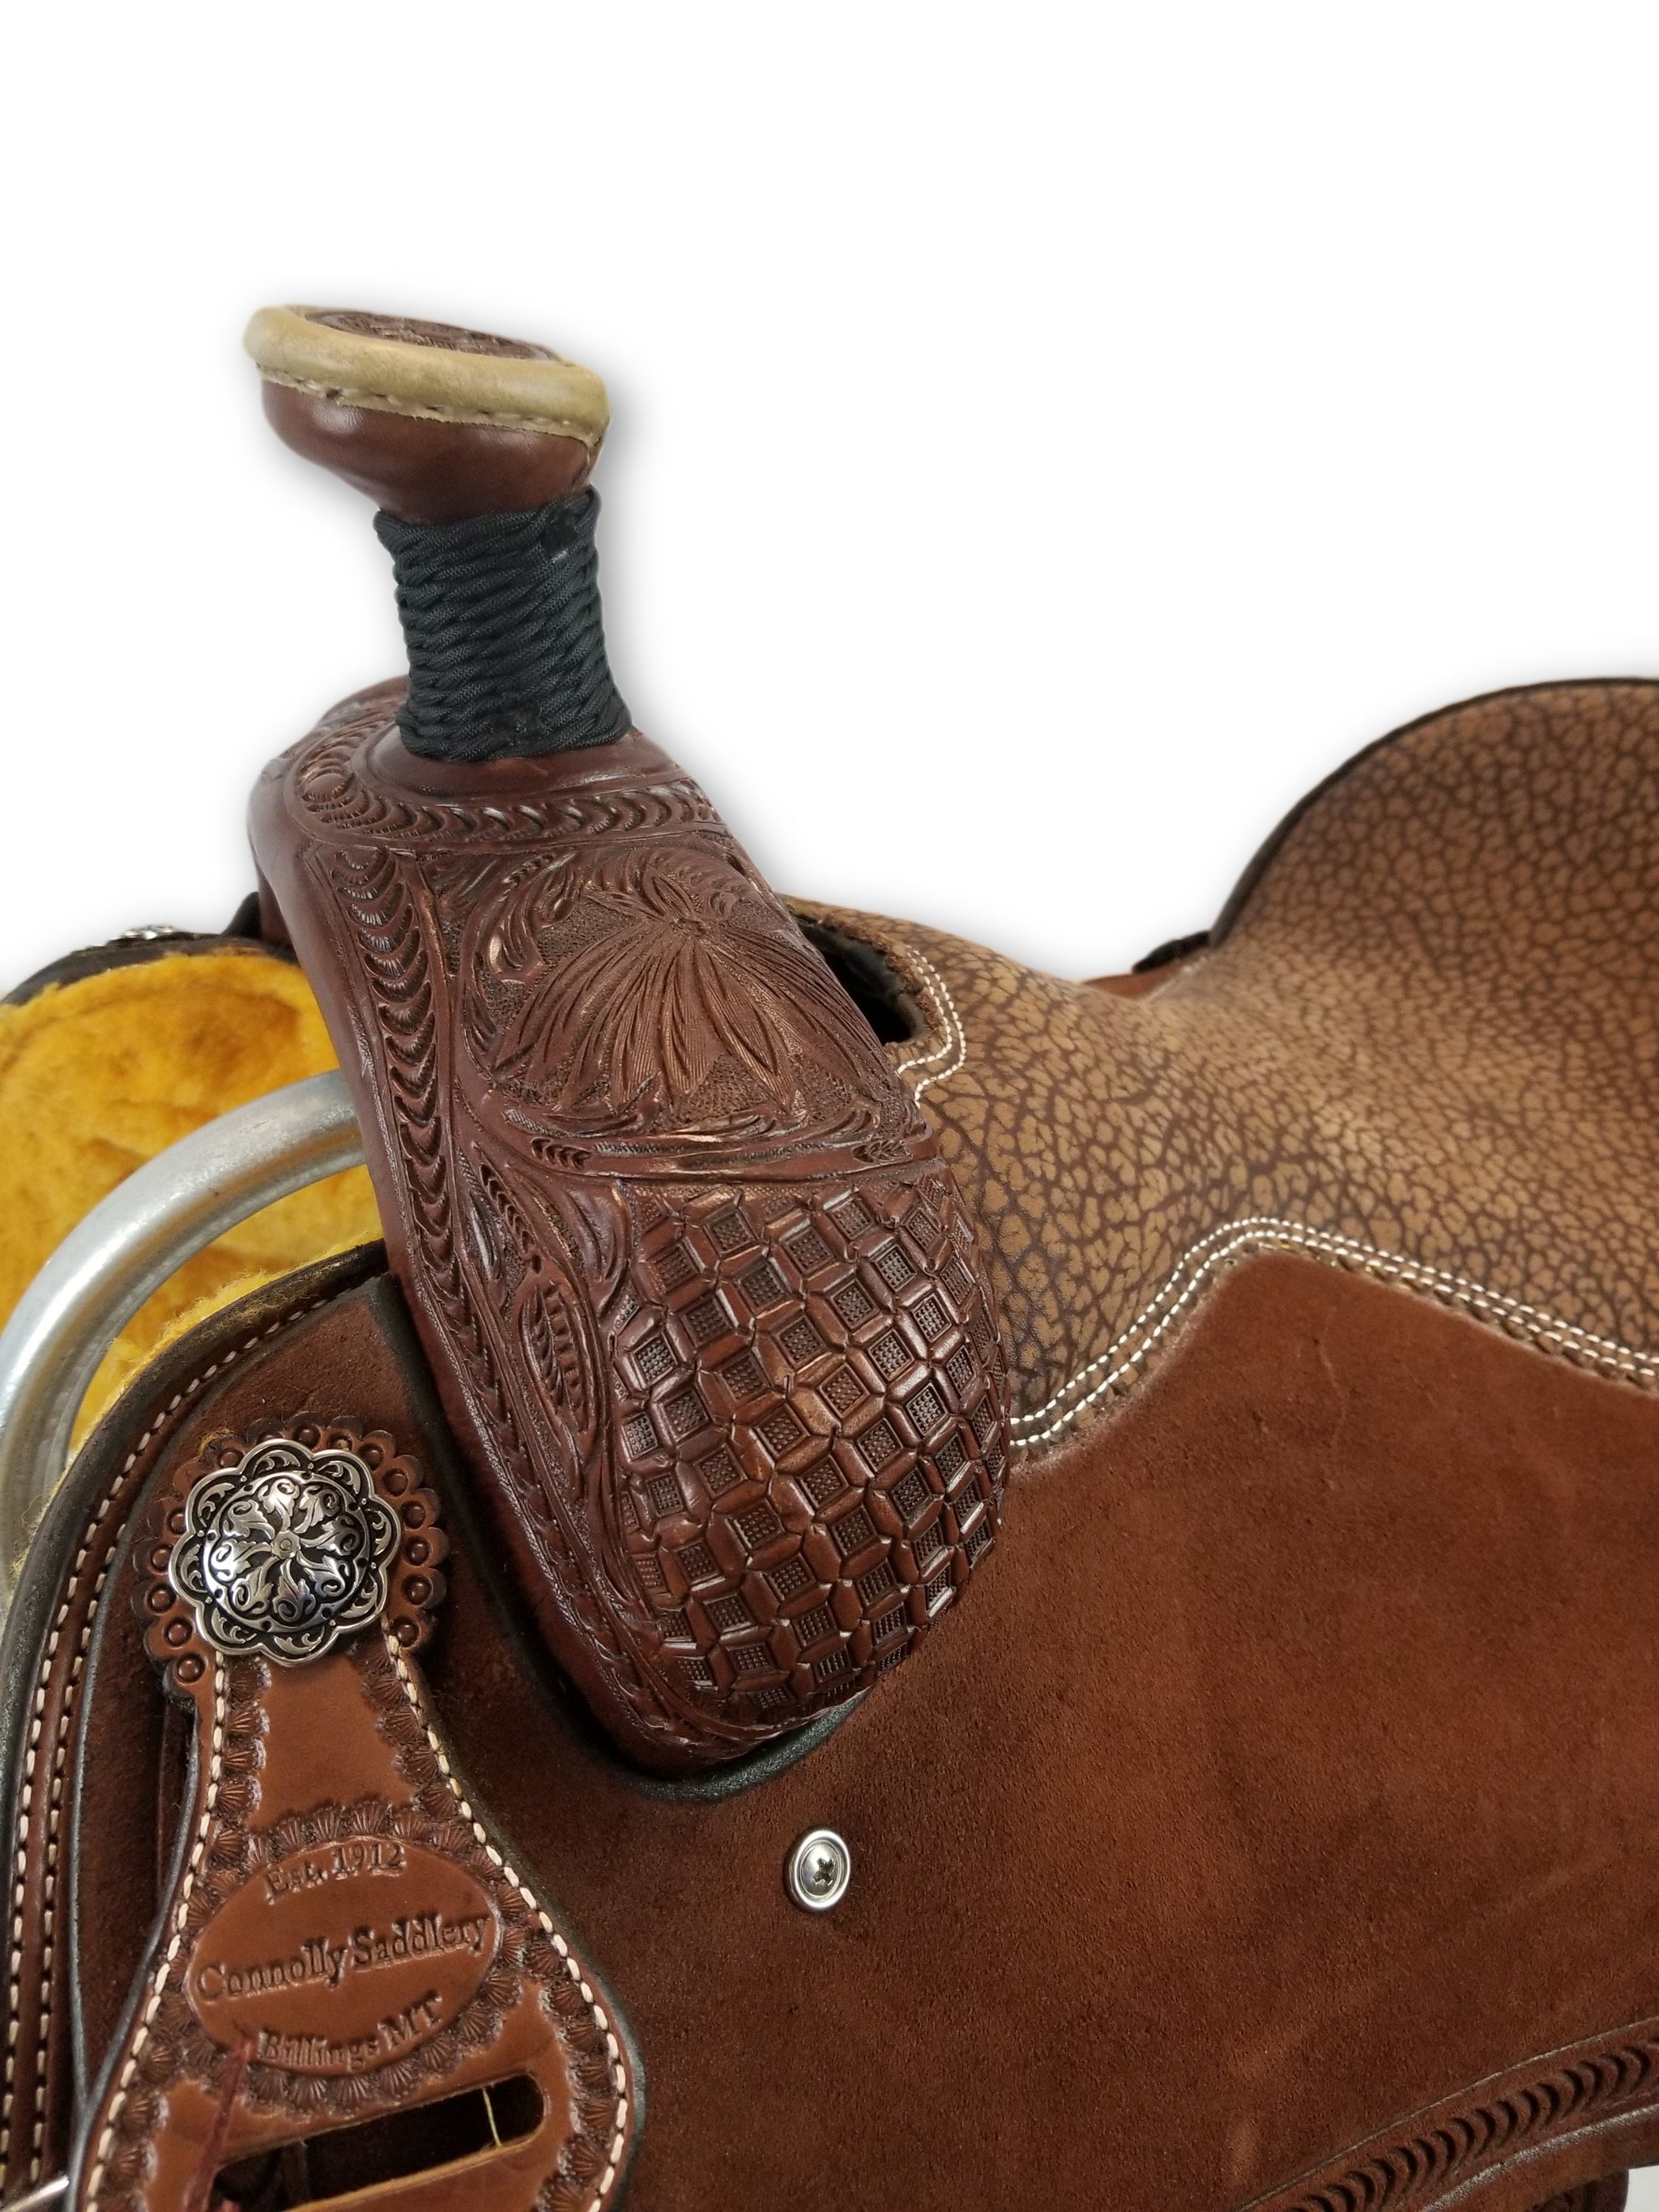 Connolly's Roping Saddle - Connolly Saddlery